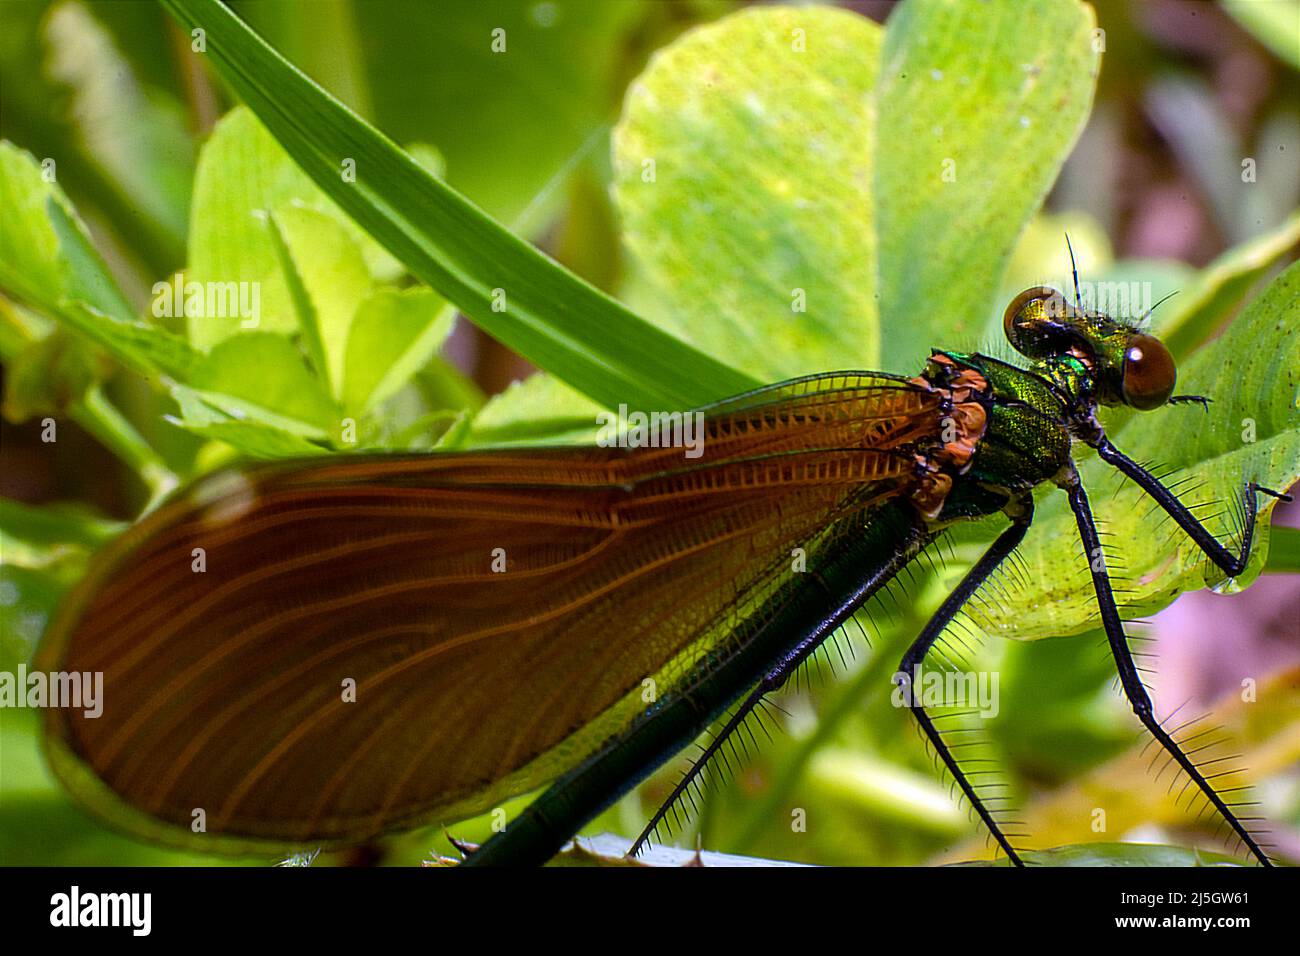 Dragonlfy insect alive macro photography, wings natural structure design inspiration amd engeneering inspiration on nature. Stock Photo